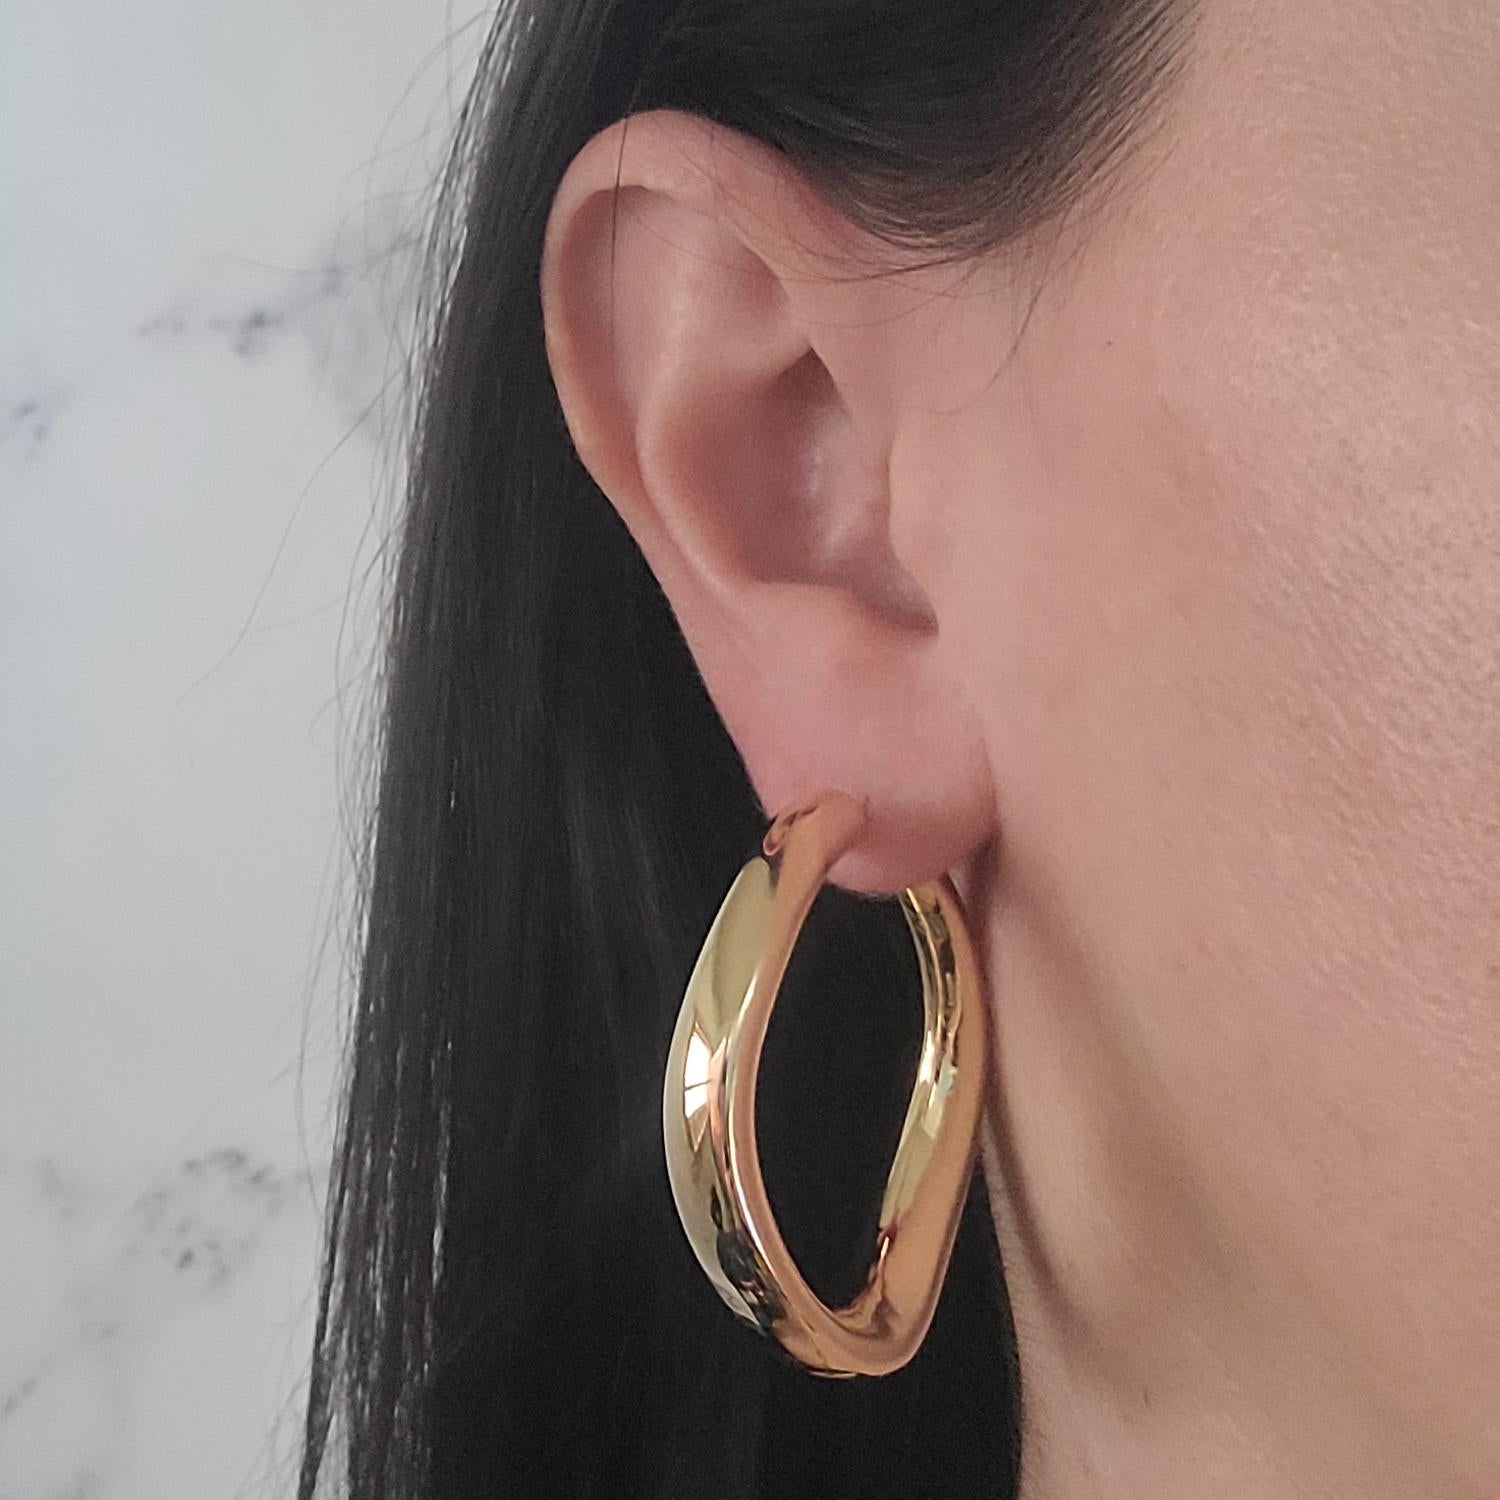 Large 18 Karat Yellow Gold Wave Hoop Earrings Created by Electroform Process with Light Weight Design. Pierced Post with Hinged Closure. 1.75